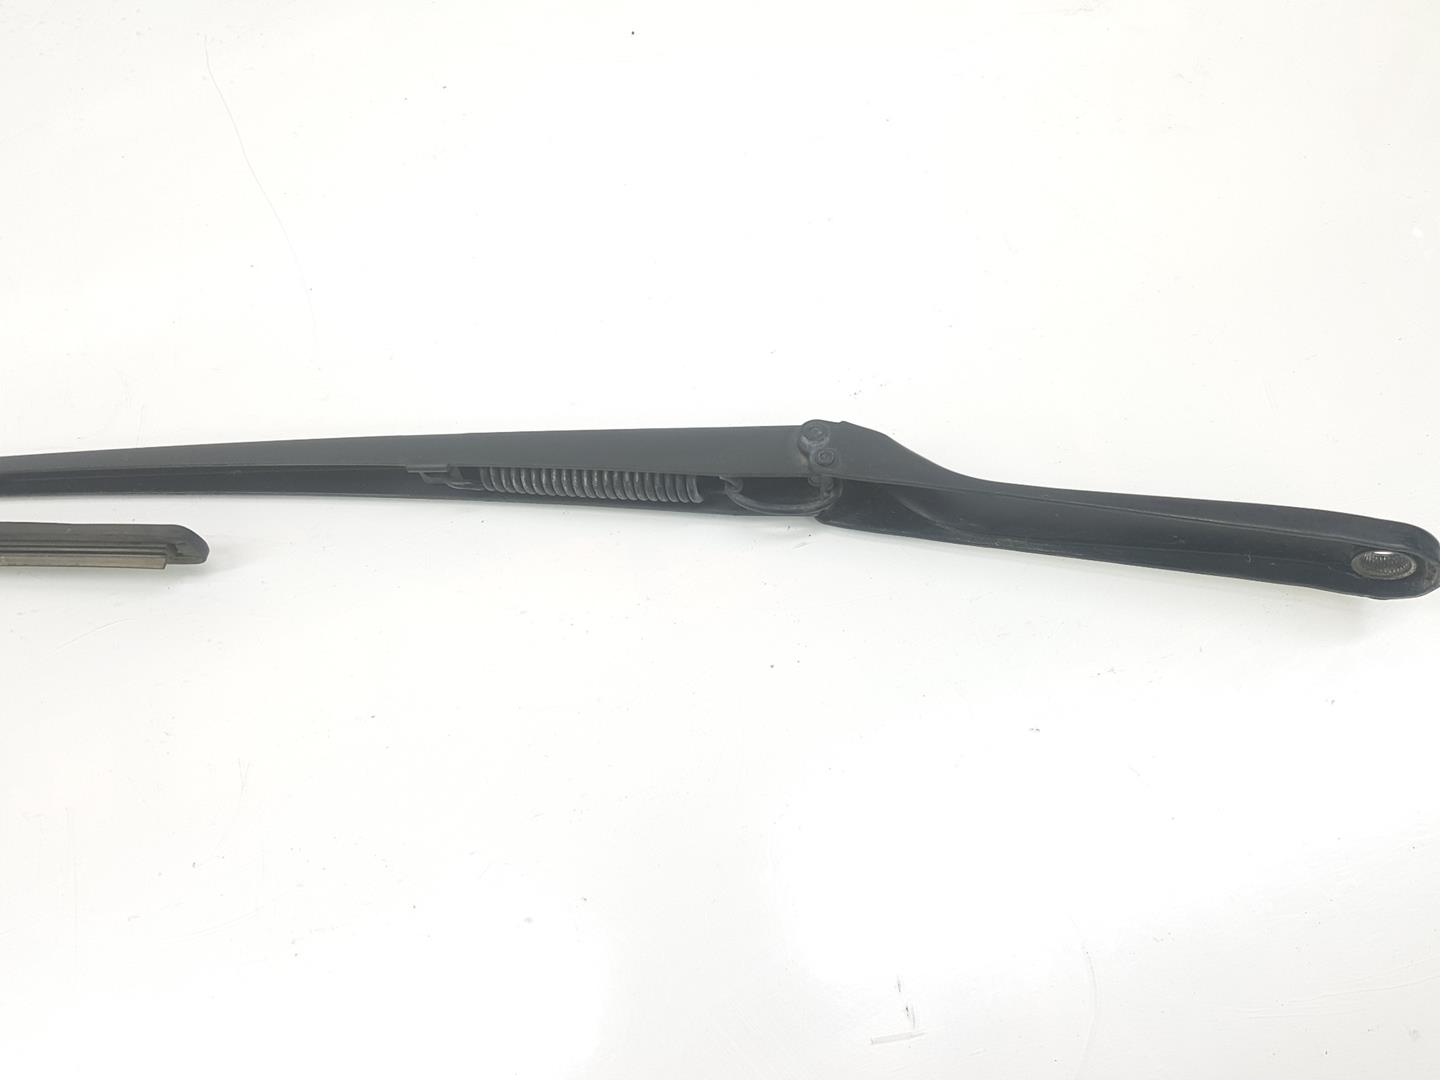 BMW X5 E53 (1999-2006) Front Wiper Arms 61619449943, 61619449943 20819719